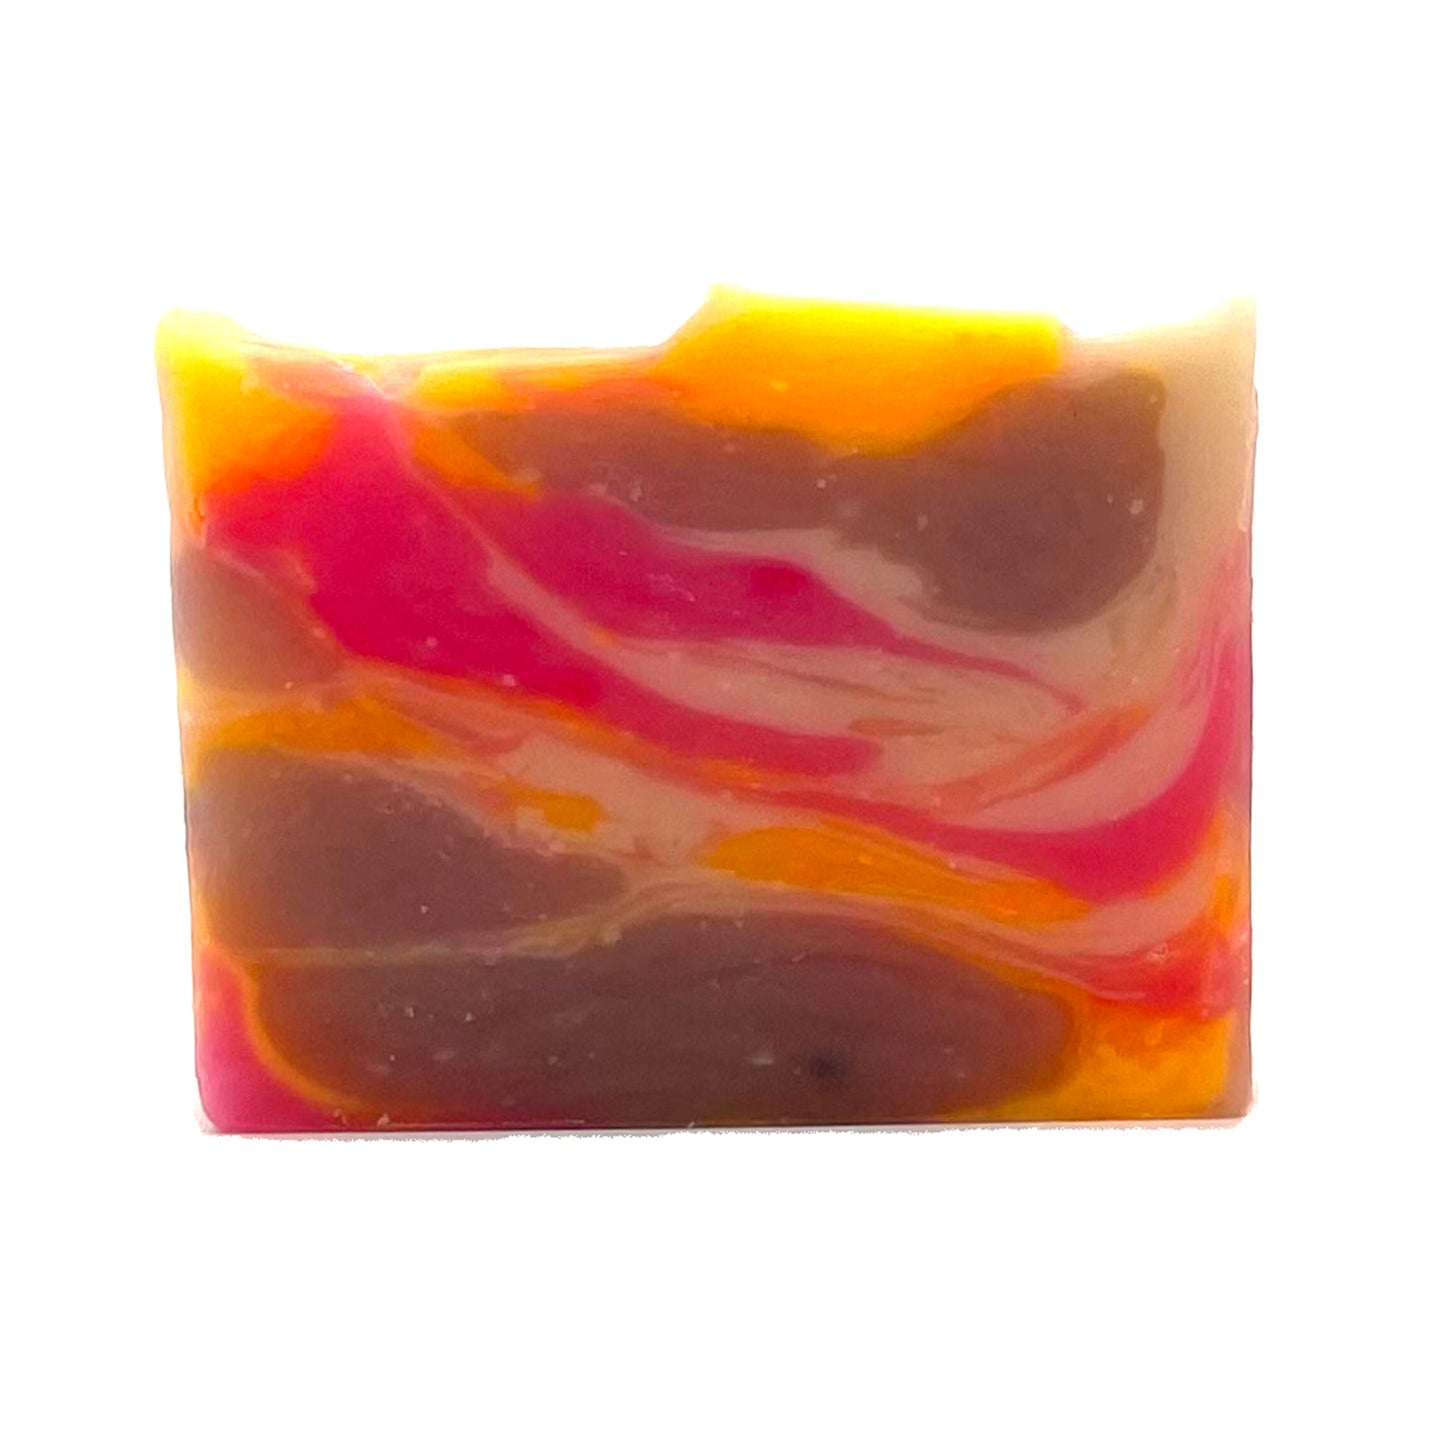 Fruity Soap by JDNatlady's Creations